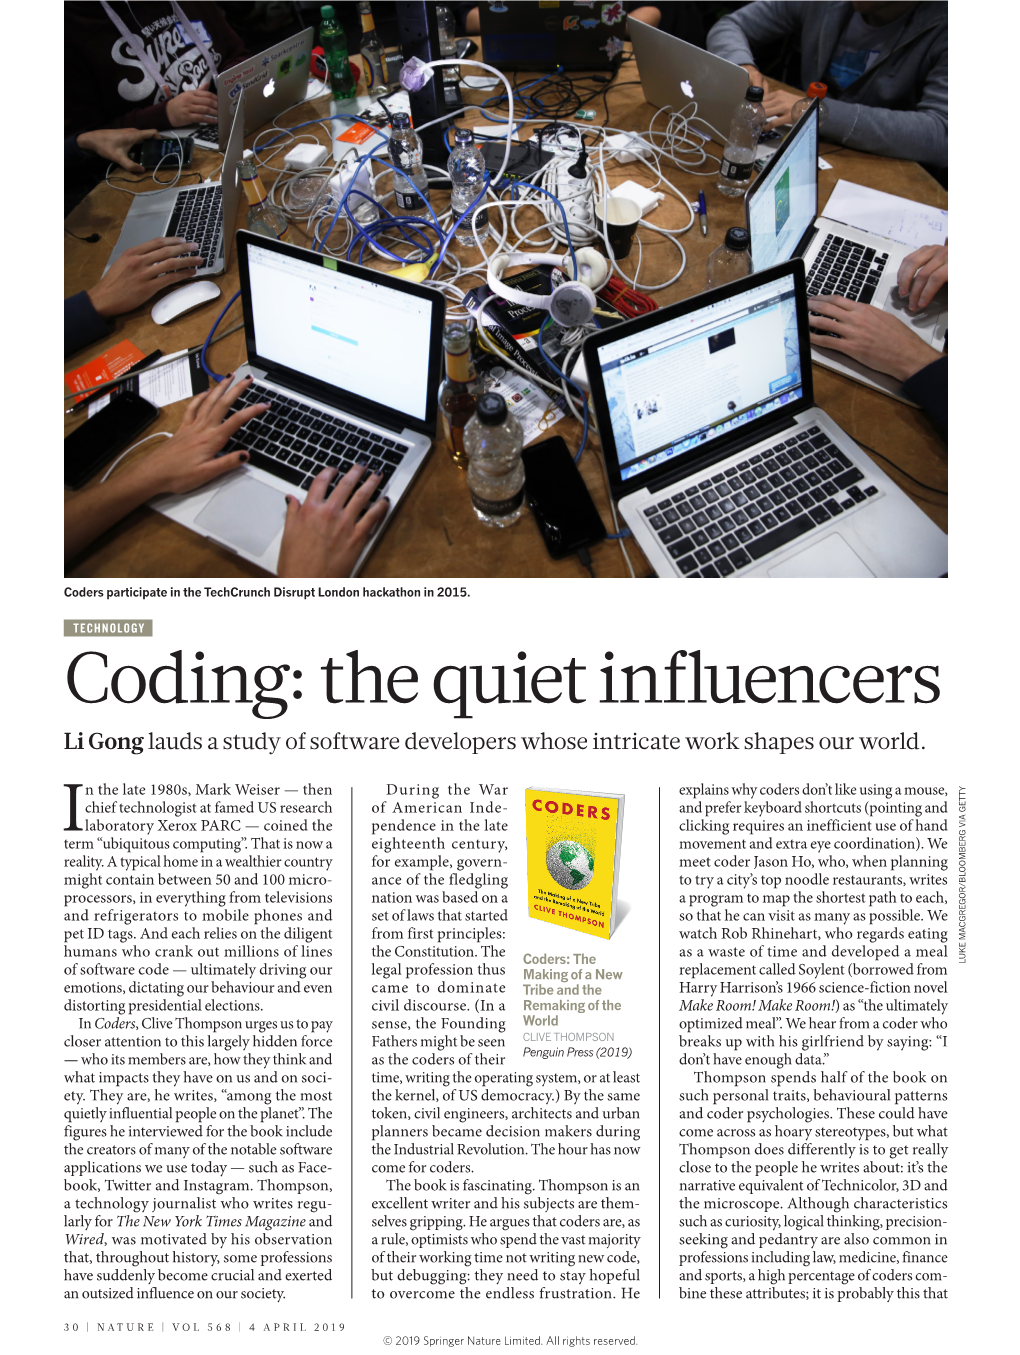 Coding: the Quiet Influencers Li Gong Lauds a Study of Software Developers Whose Intricate Work Shapes Our World